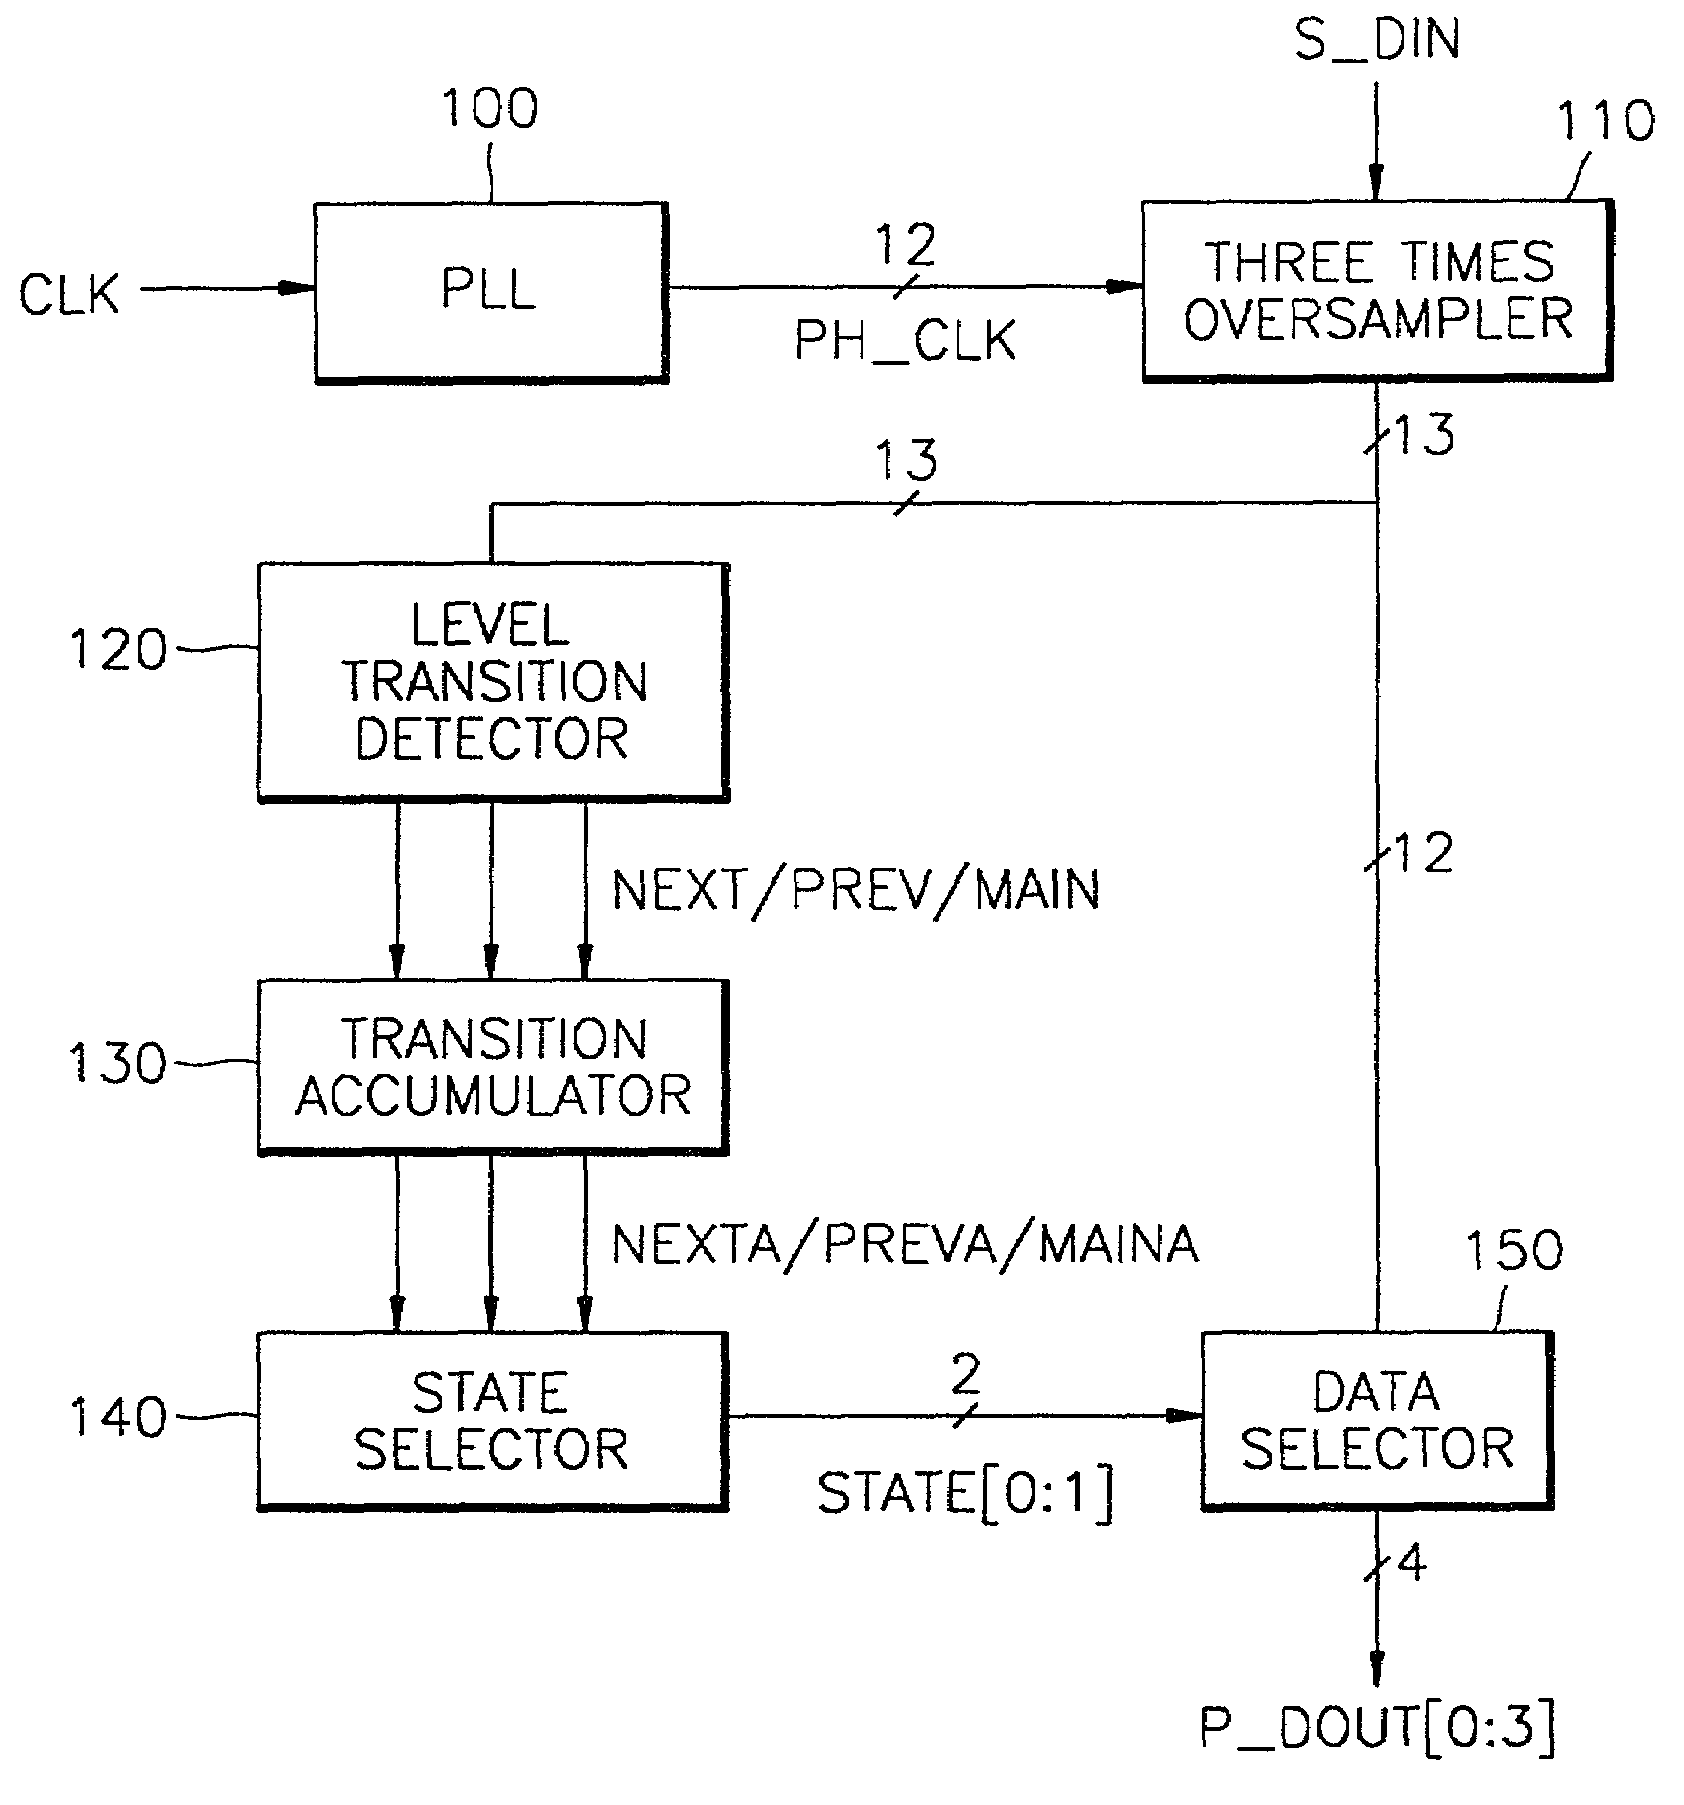 Data recovery apparatus and method for minimizing errors due to clock skew